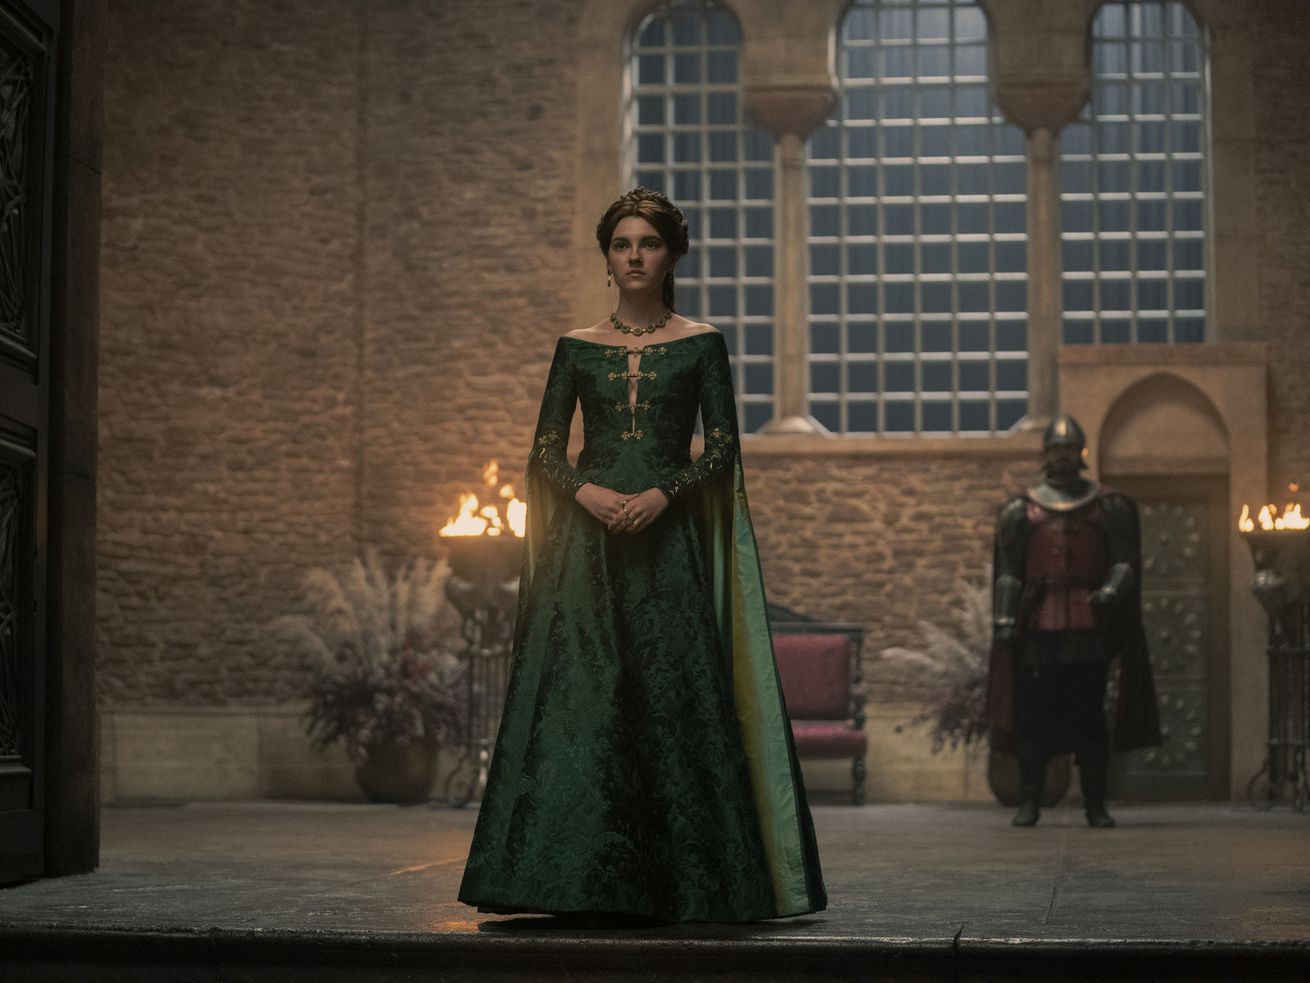 House of the Dragon’s green dress signals a major series turning point